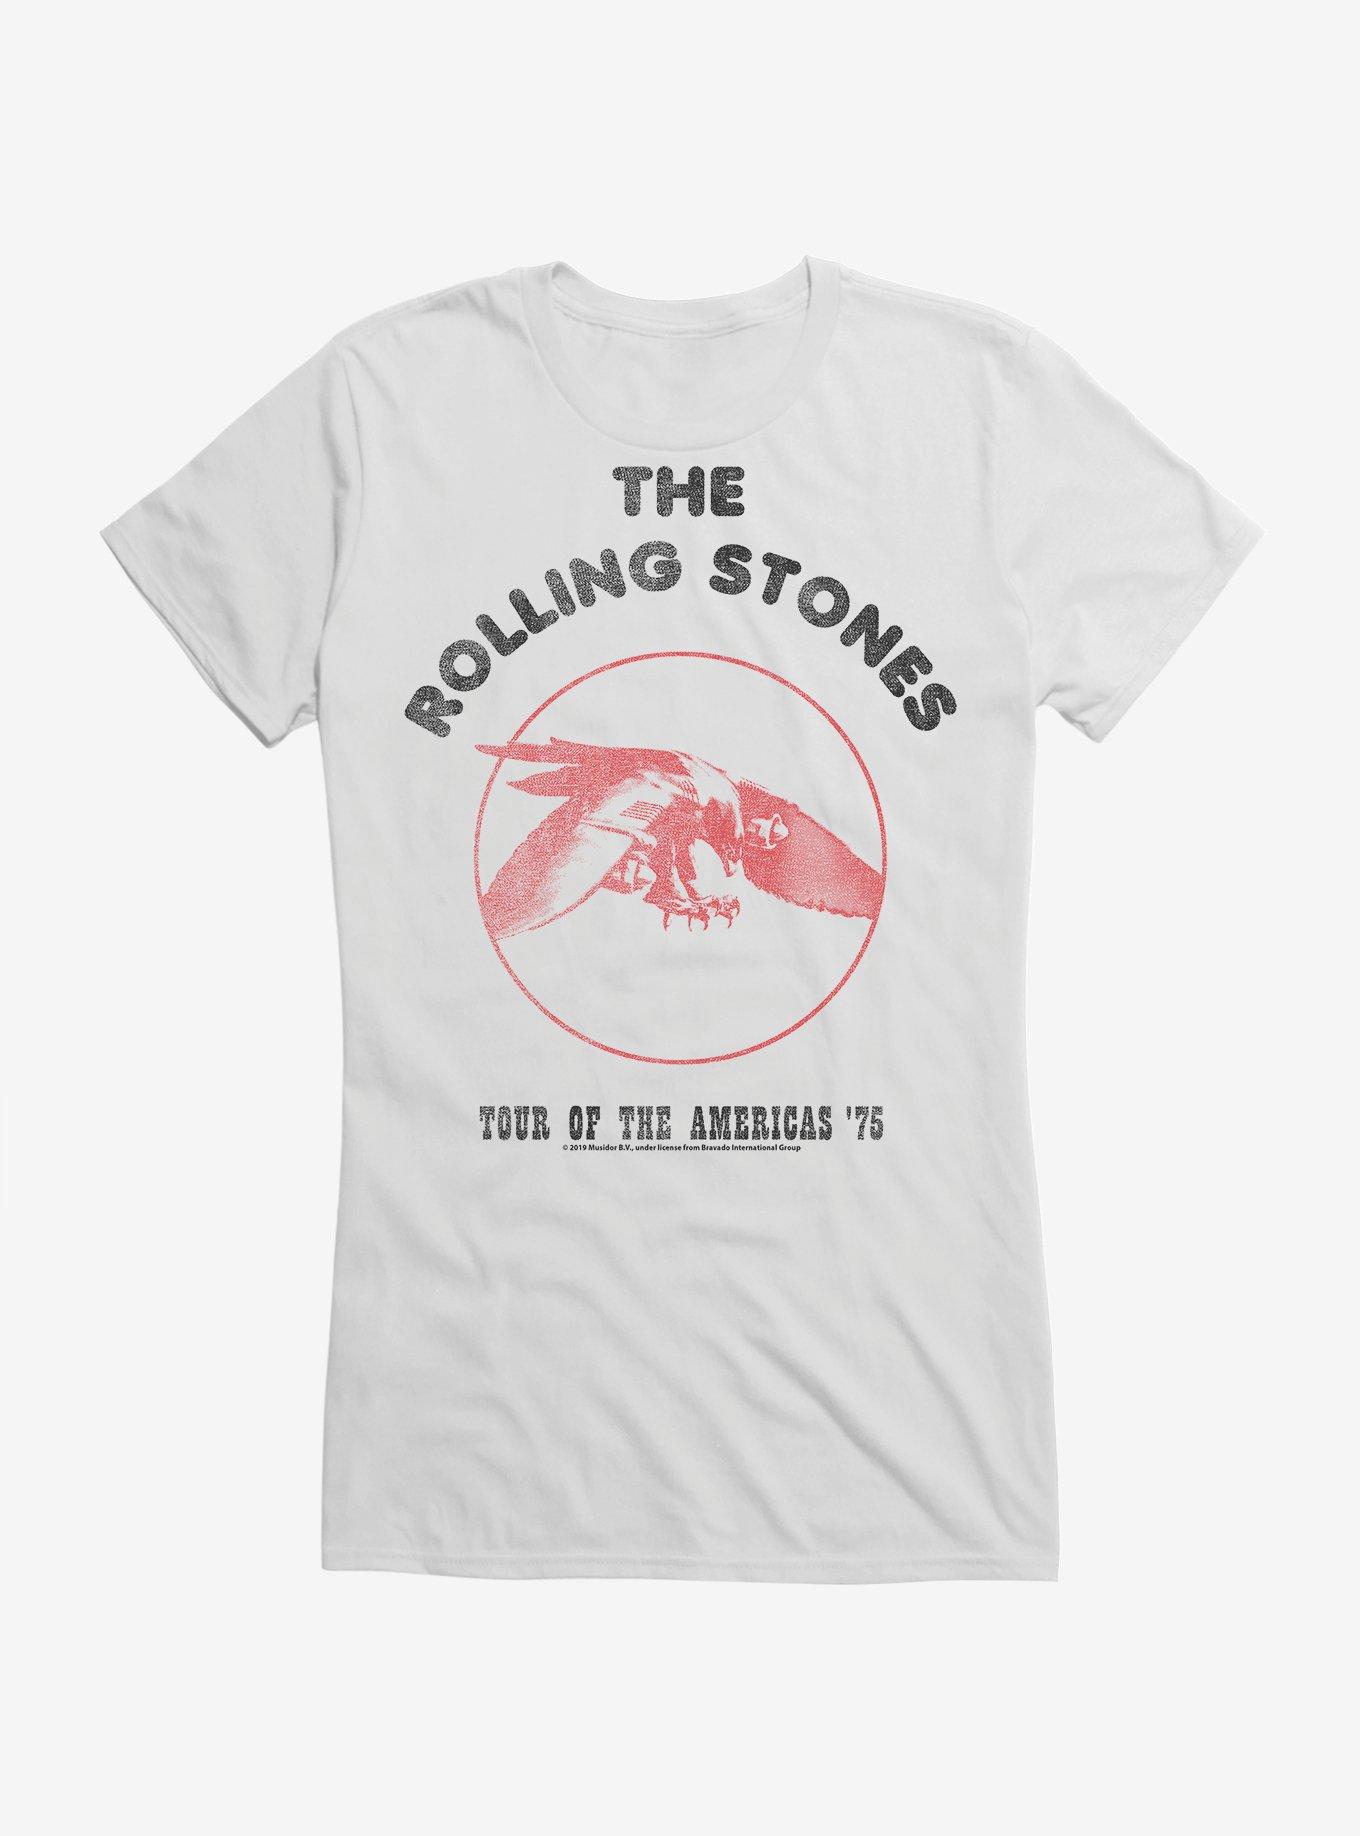 The Rolling Stones Tour Of America's '75 Girls T-Shirt